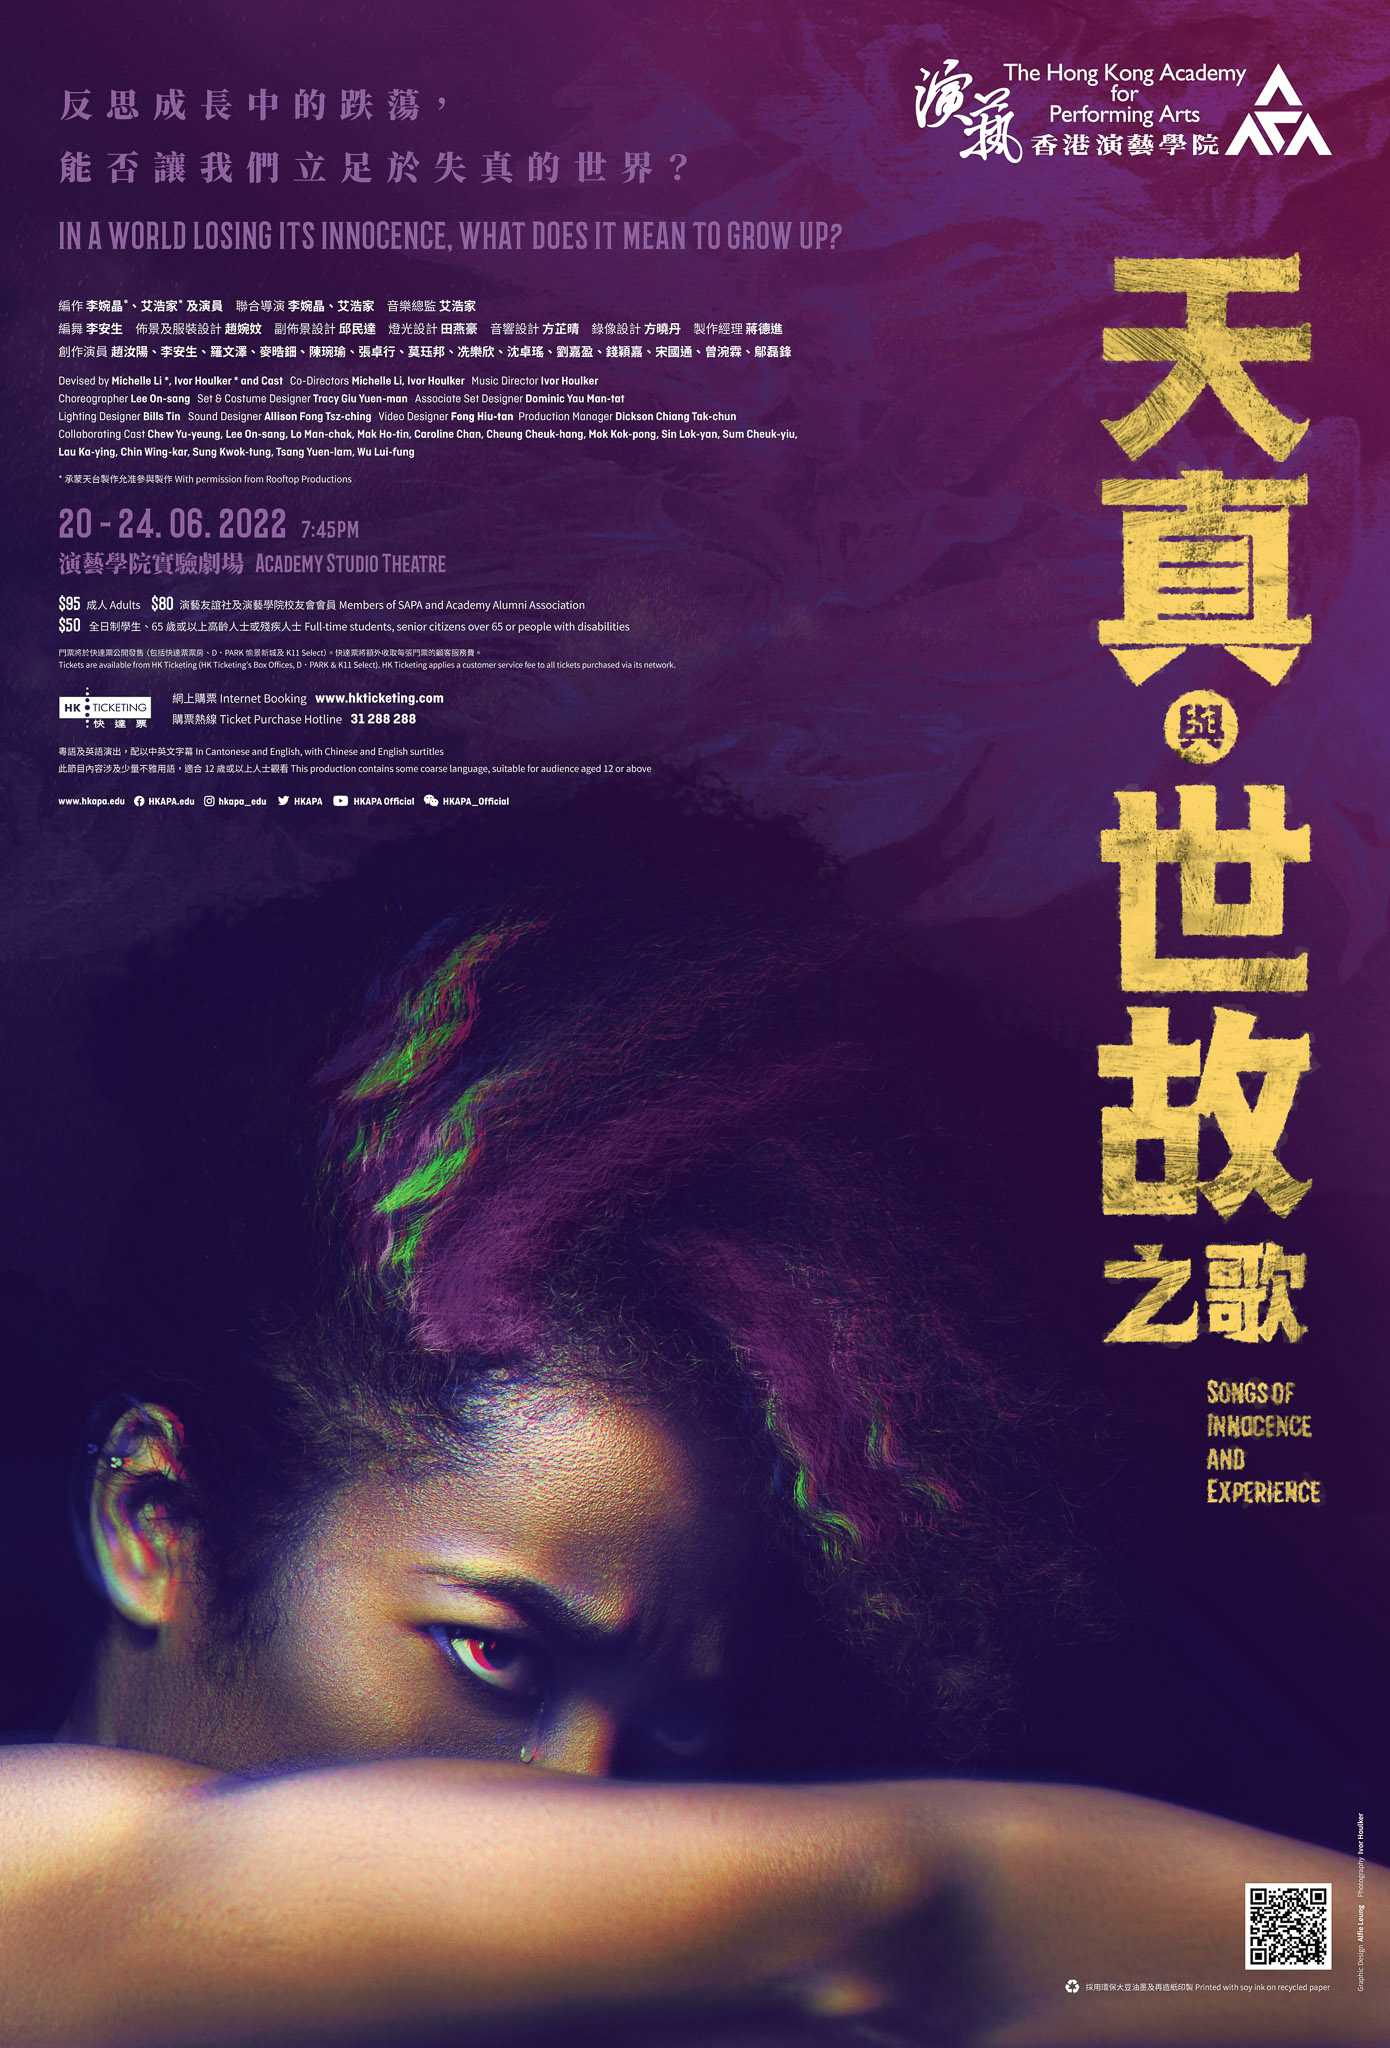 Songs of Innocence and Experience Poster | Featuring: Caroline Chan | Tagged as: Promotion, Songs of Innocence and Experience | Photo: Ivor Houlker |  (Rooftop Productions • Hong Kong Theatre Company)  | Rooftop Productions • Hong Kong Theatre Company